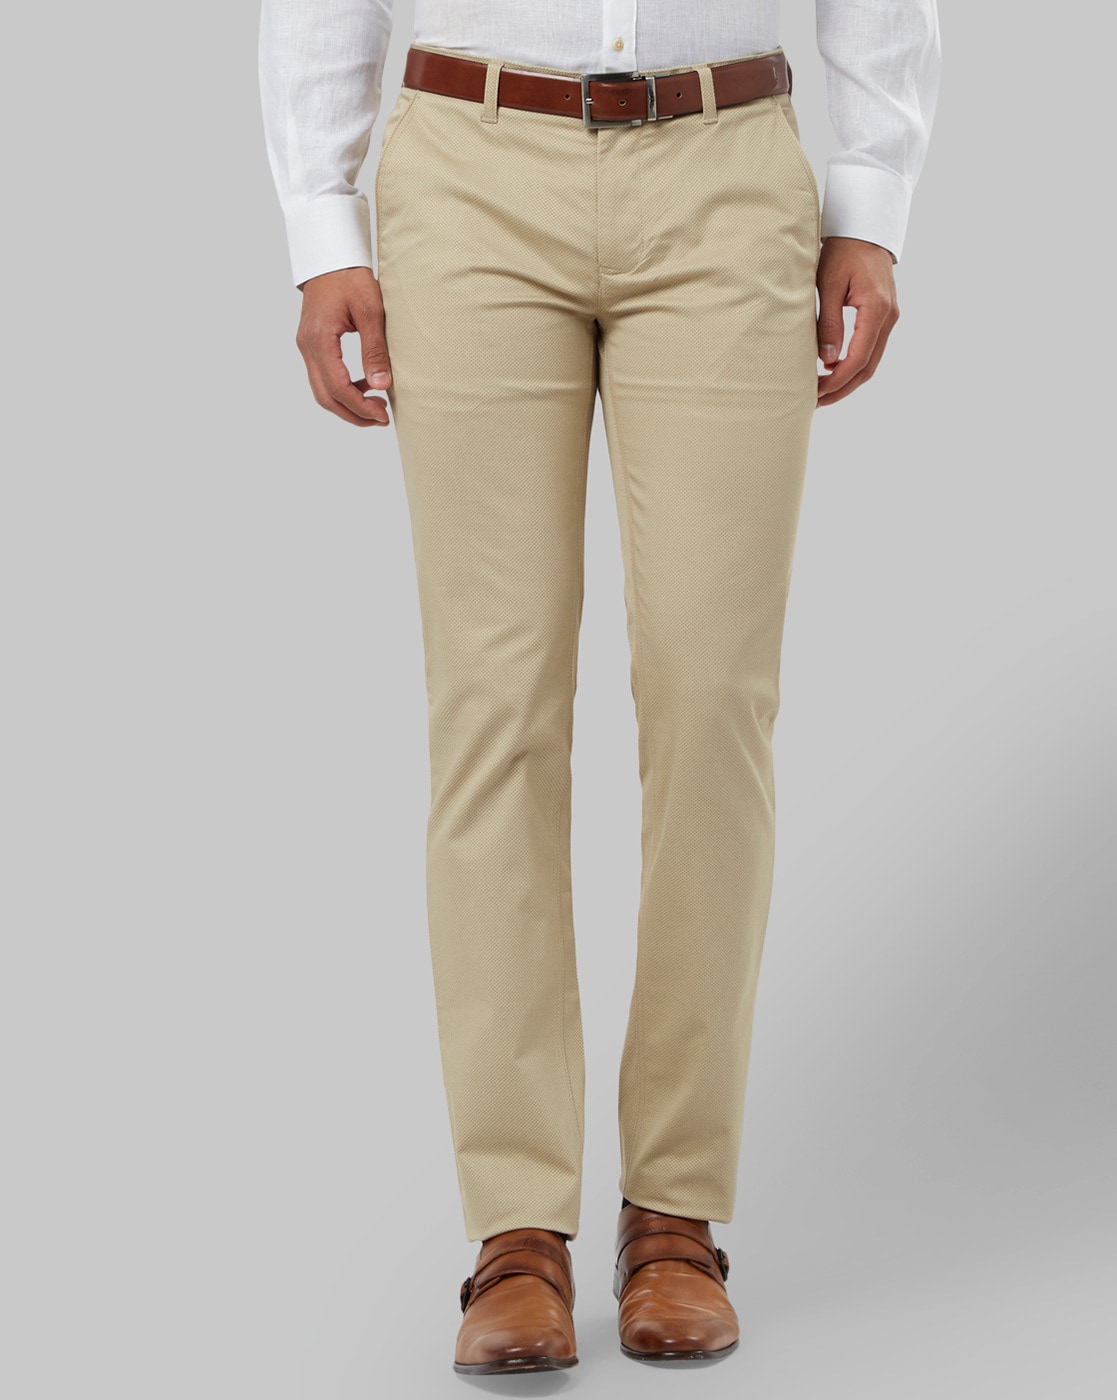 Buy Particle Trousers for Mens Formal  Regular Fit Formal Pants Light  Cream Colour Sizes 30  44 Grasim Fabric online  Looksgudin